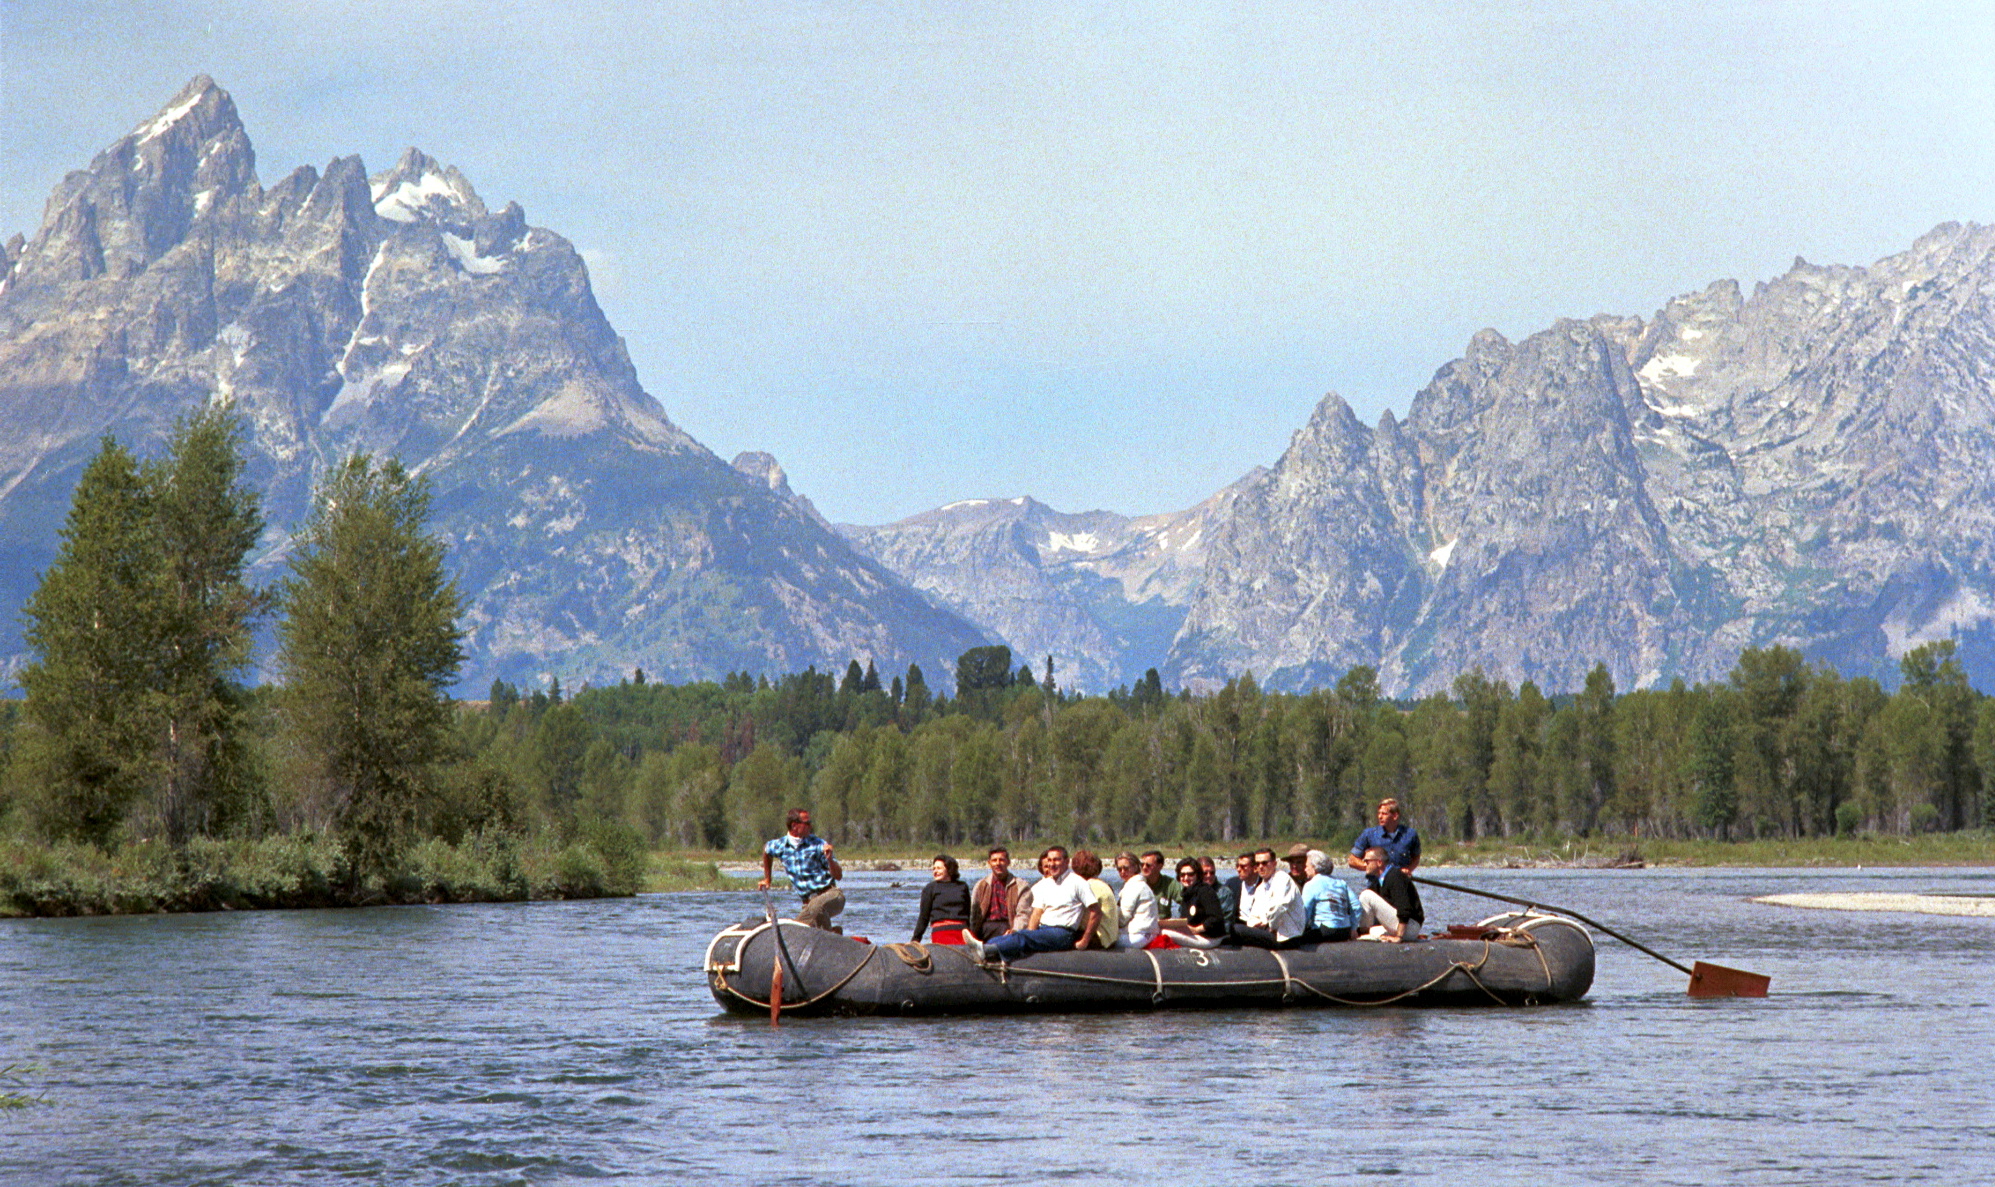 Lady Bird Johnson and others in 1964 raft down the Snake River.